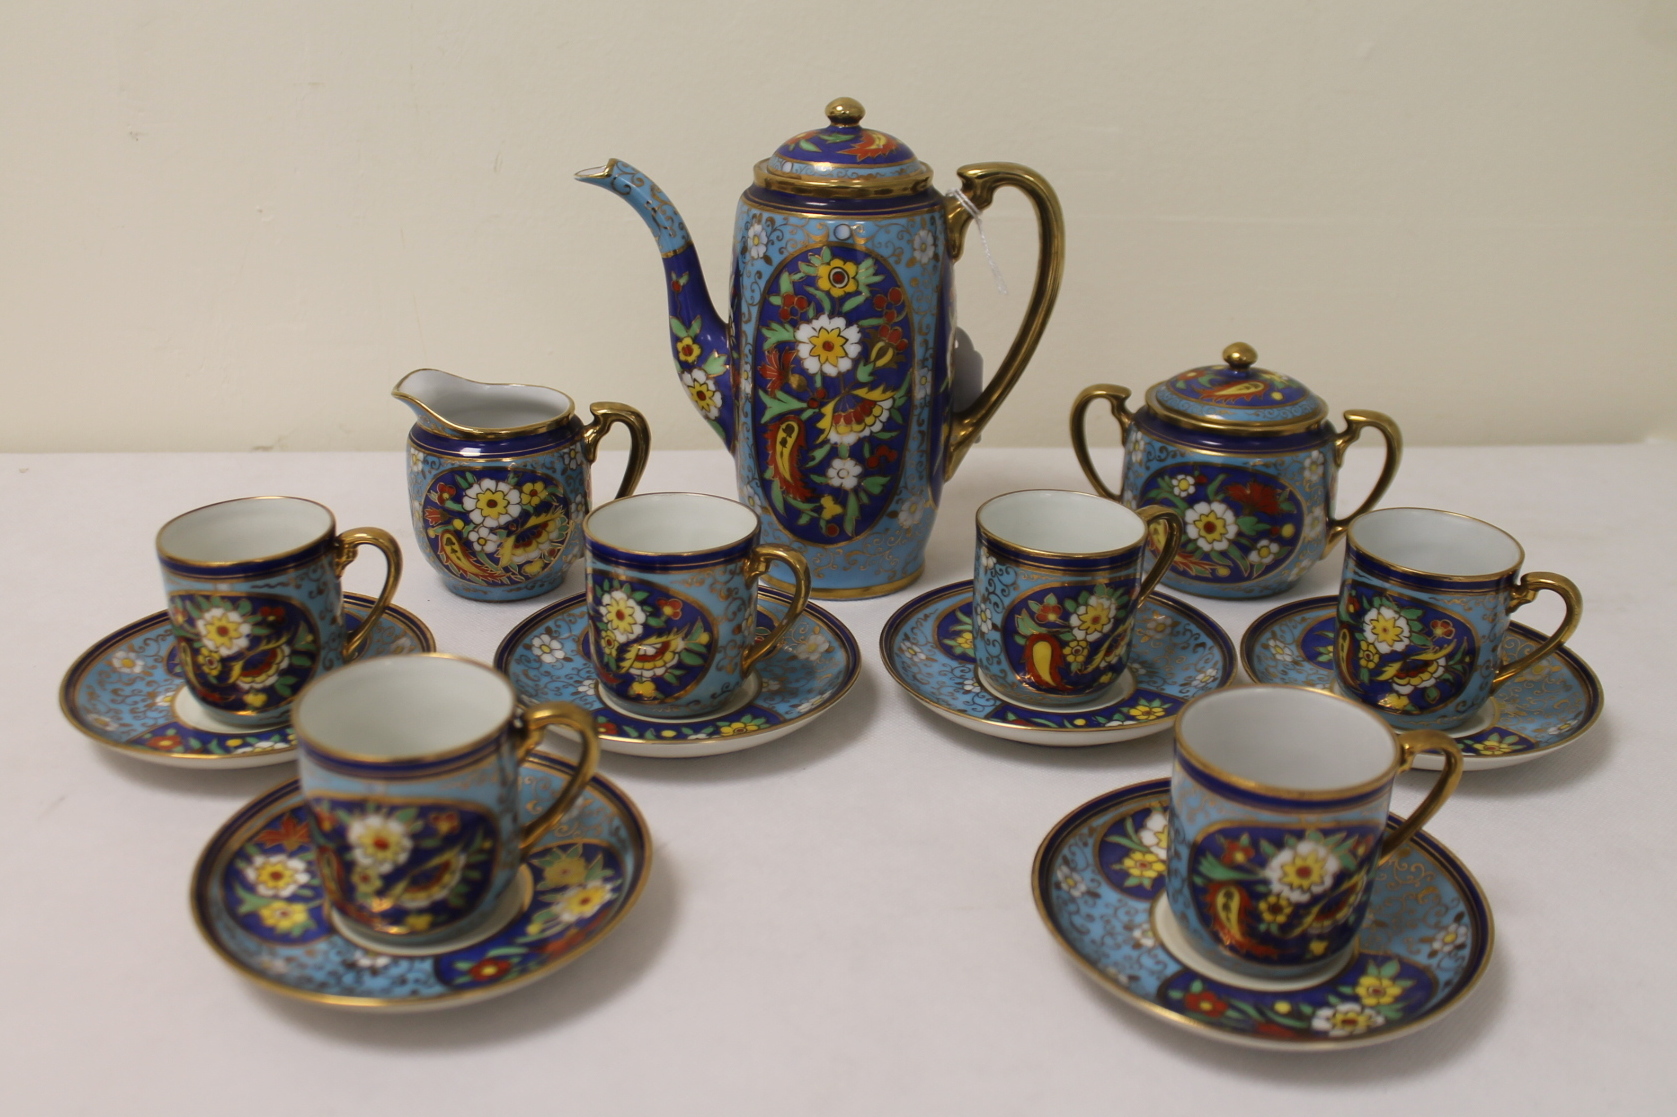 Noritake floral decorated coffee set in polychrome and gilt for six settings.